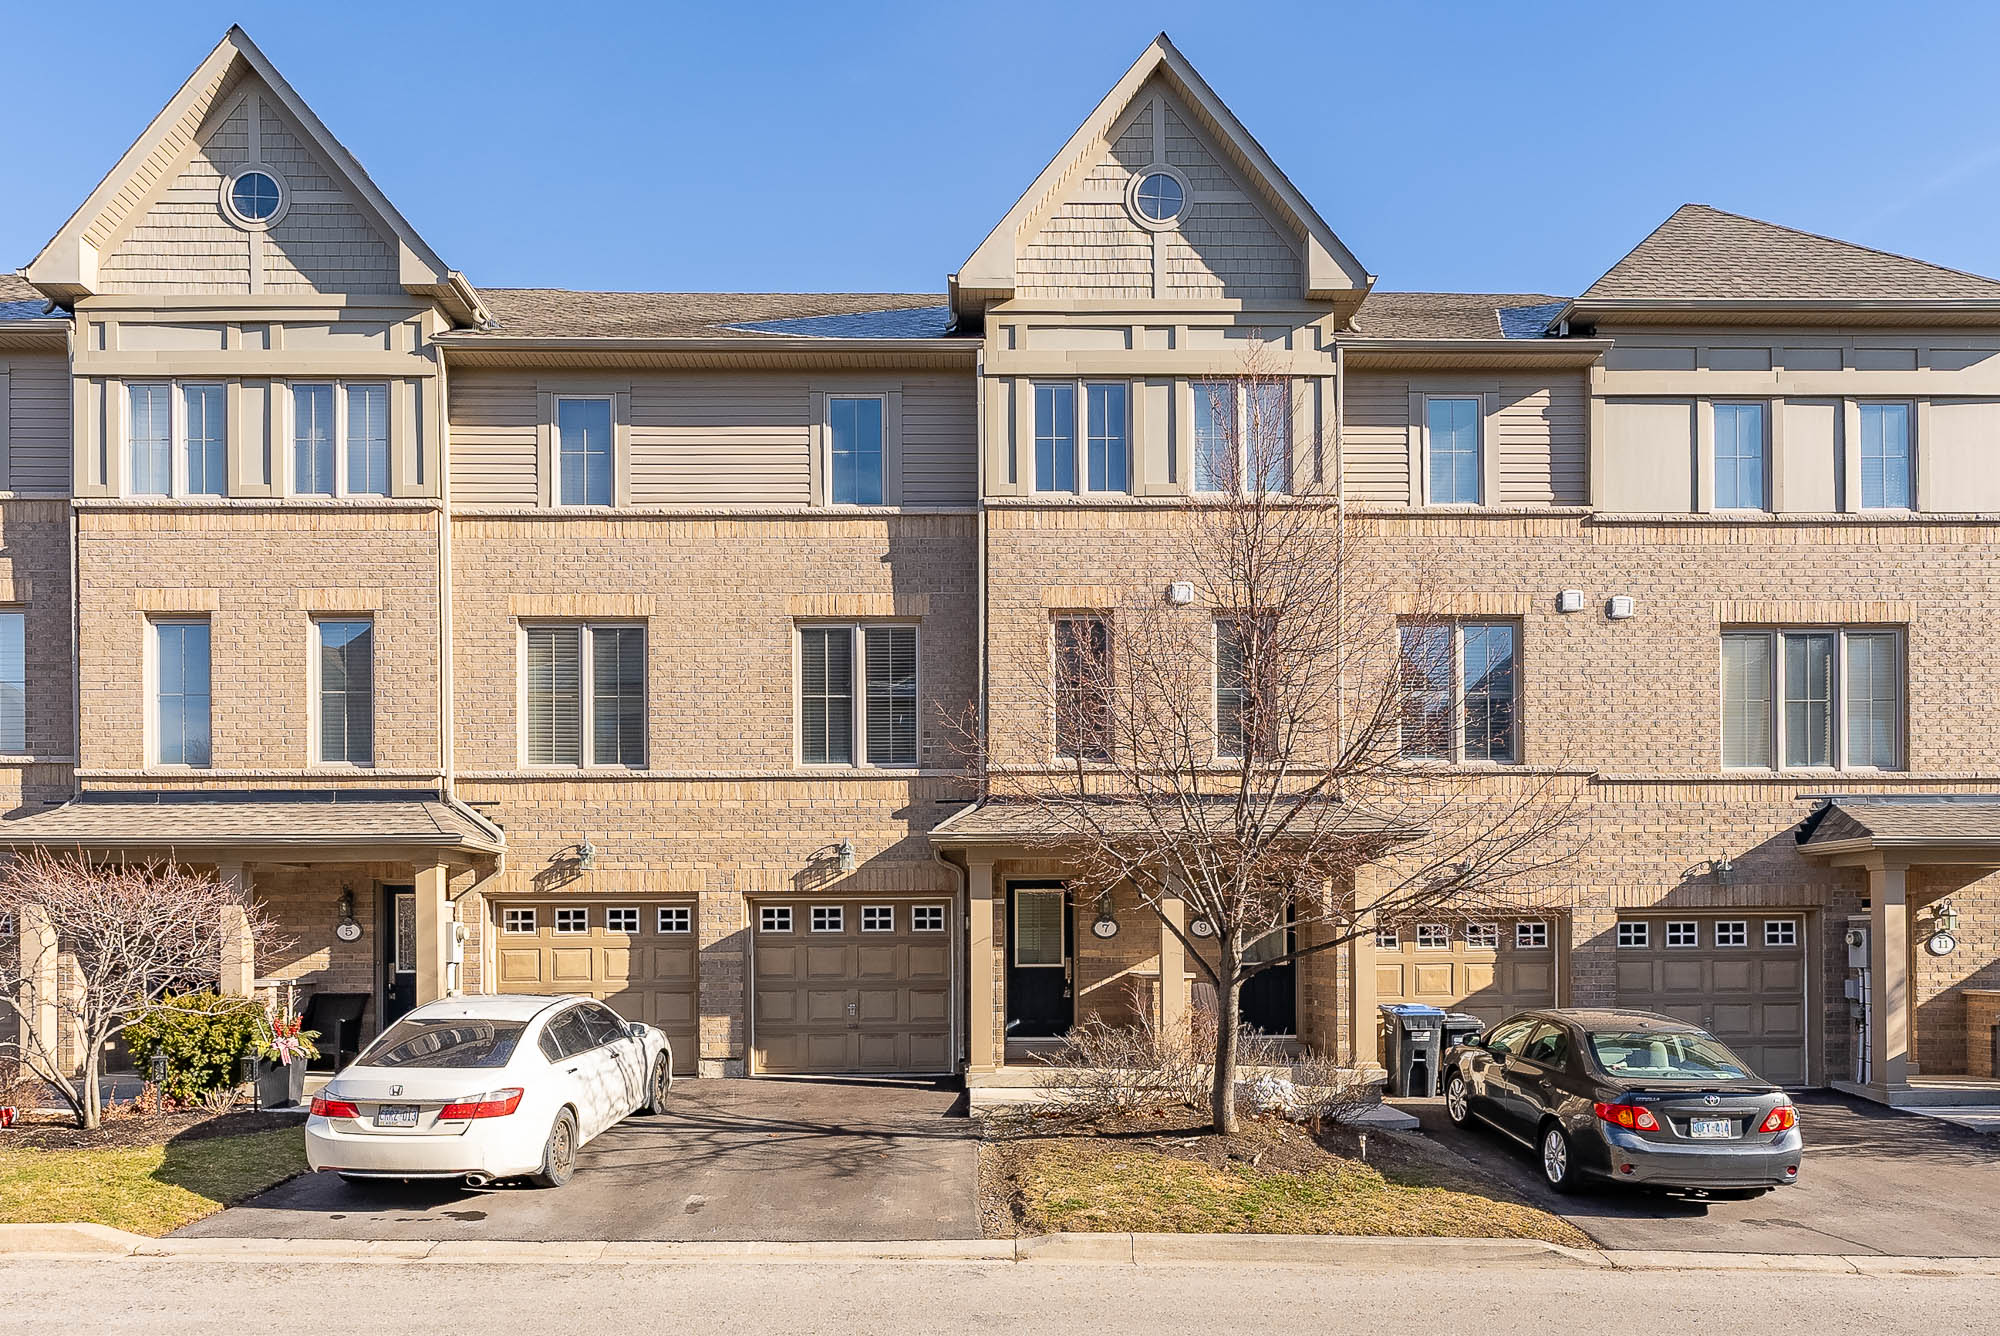 3 Br 2 Ba Townhome For Rent Located At - 7 Cailiff St Brampton ON L6Y 0P9